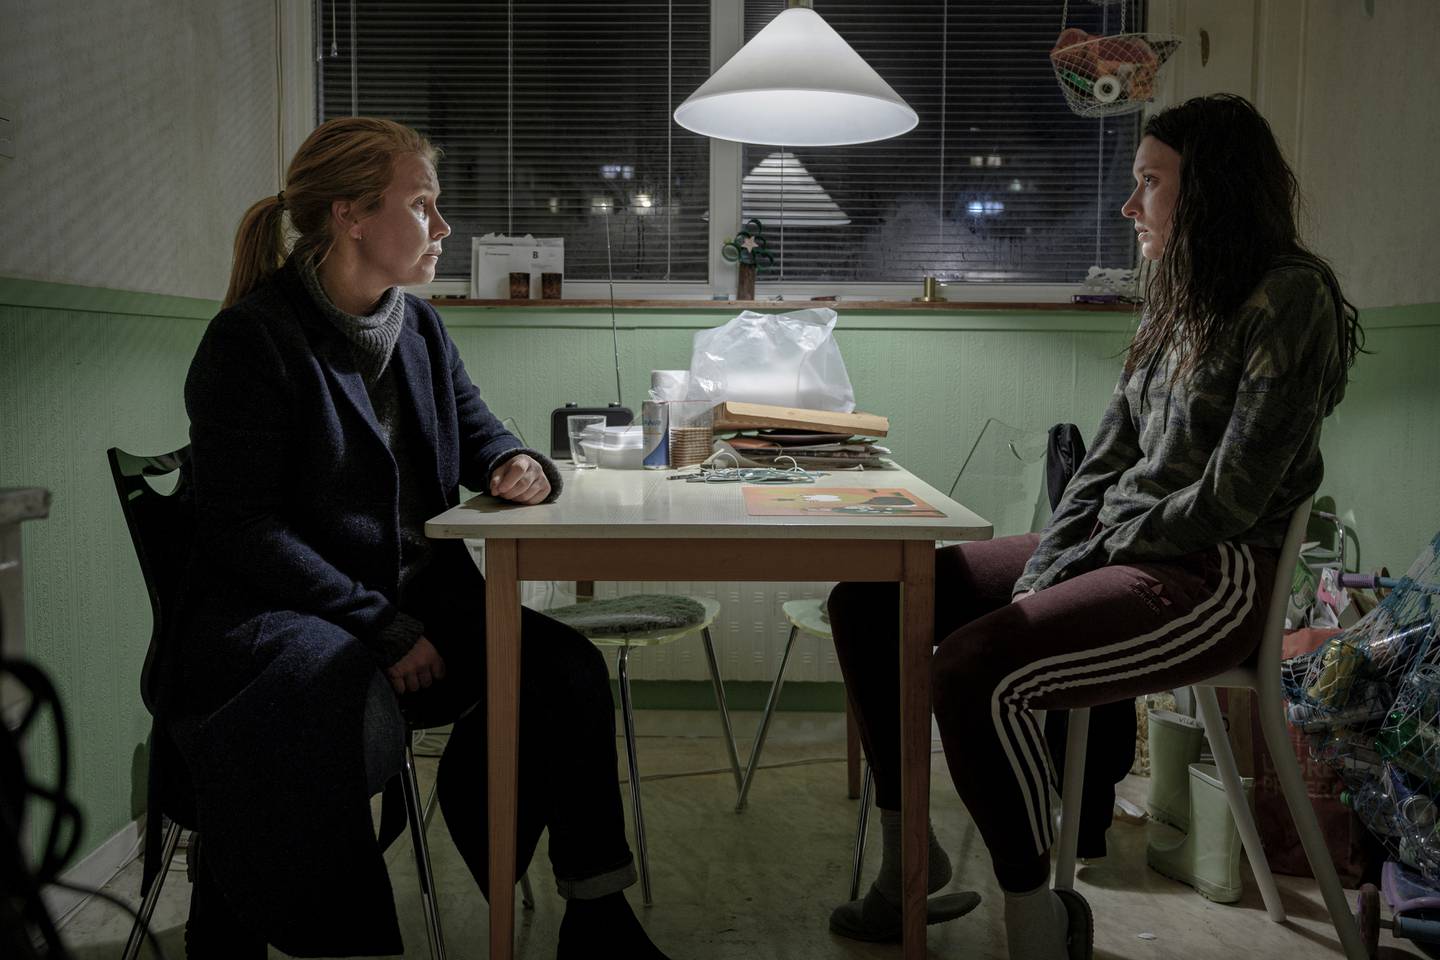 Jenni (Josefin Asplund) has to endure critical questions from the ongoing police investigator Alice (Eva Melander) in the hunt for Lucas.